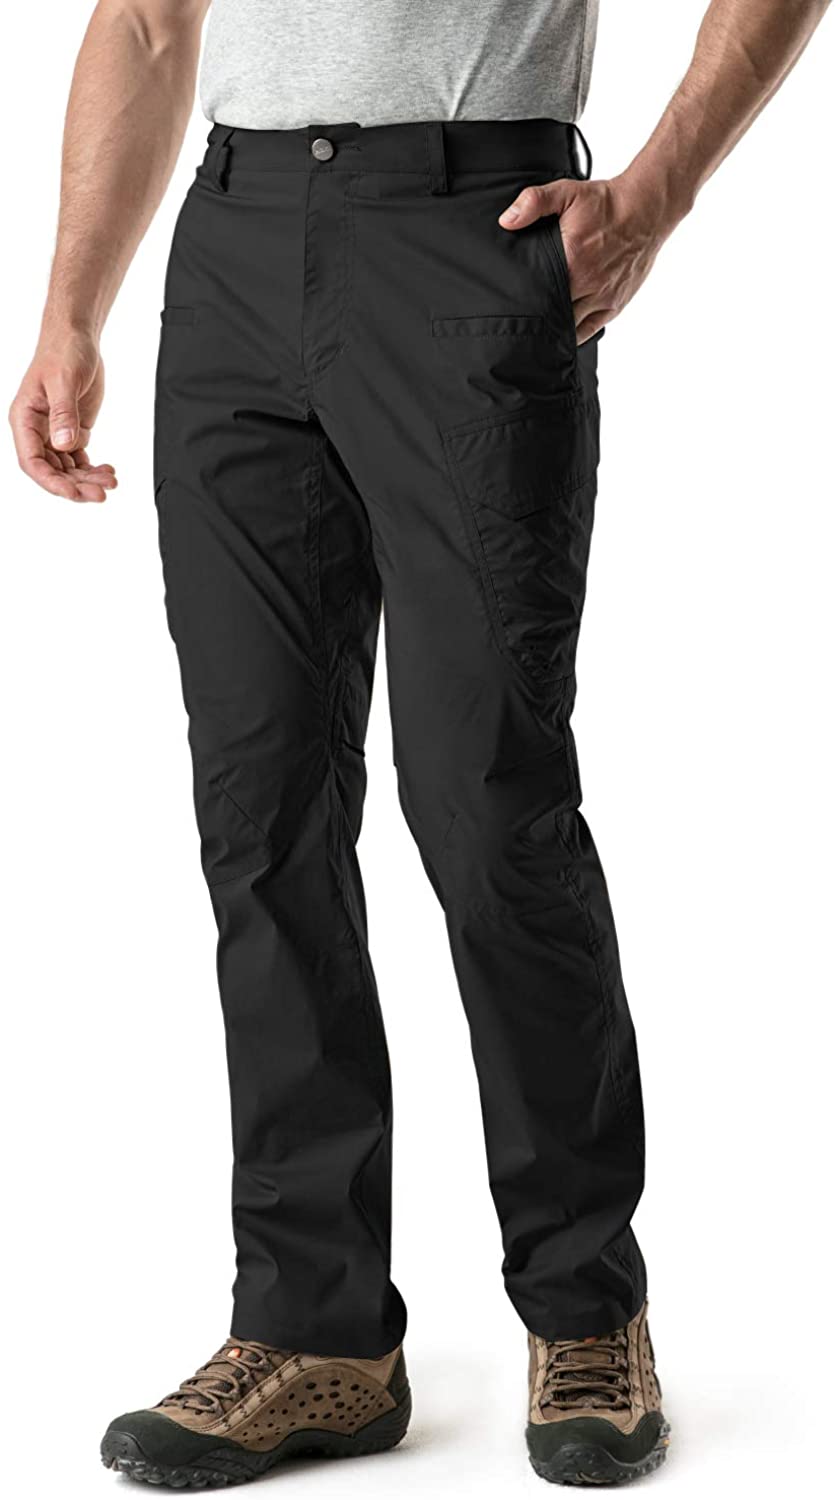 UPF 50+ Outdoor Apparel Water Resistant Outdoor Pants Lightweight Stretch Cargo/Straight Work Pants CQR Men's Hiking Pants 